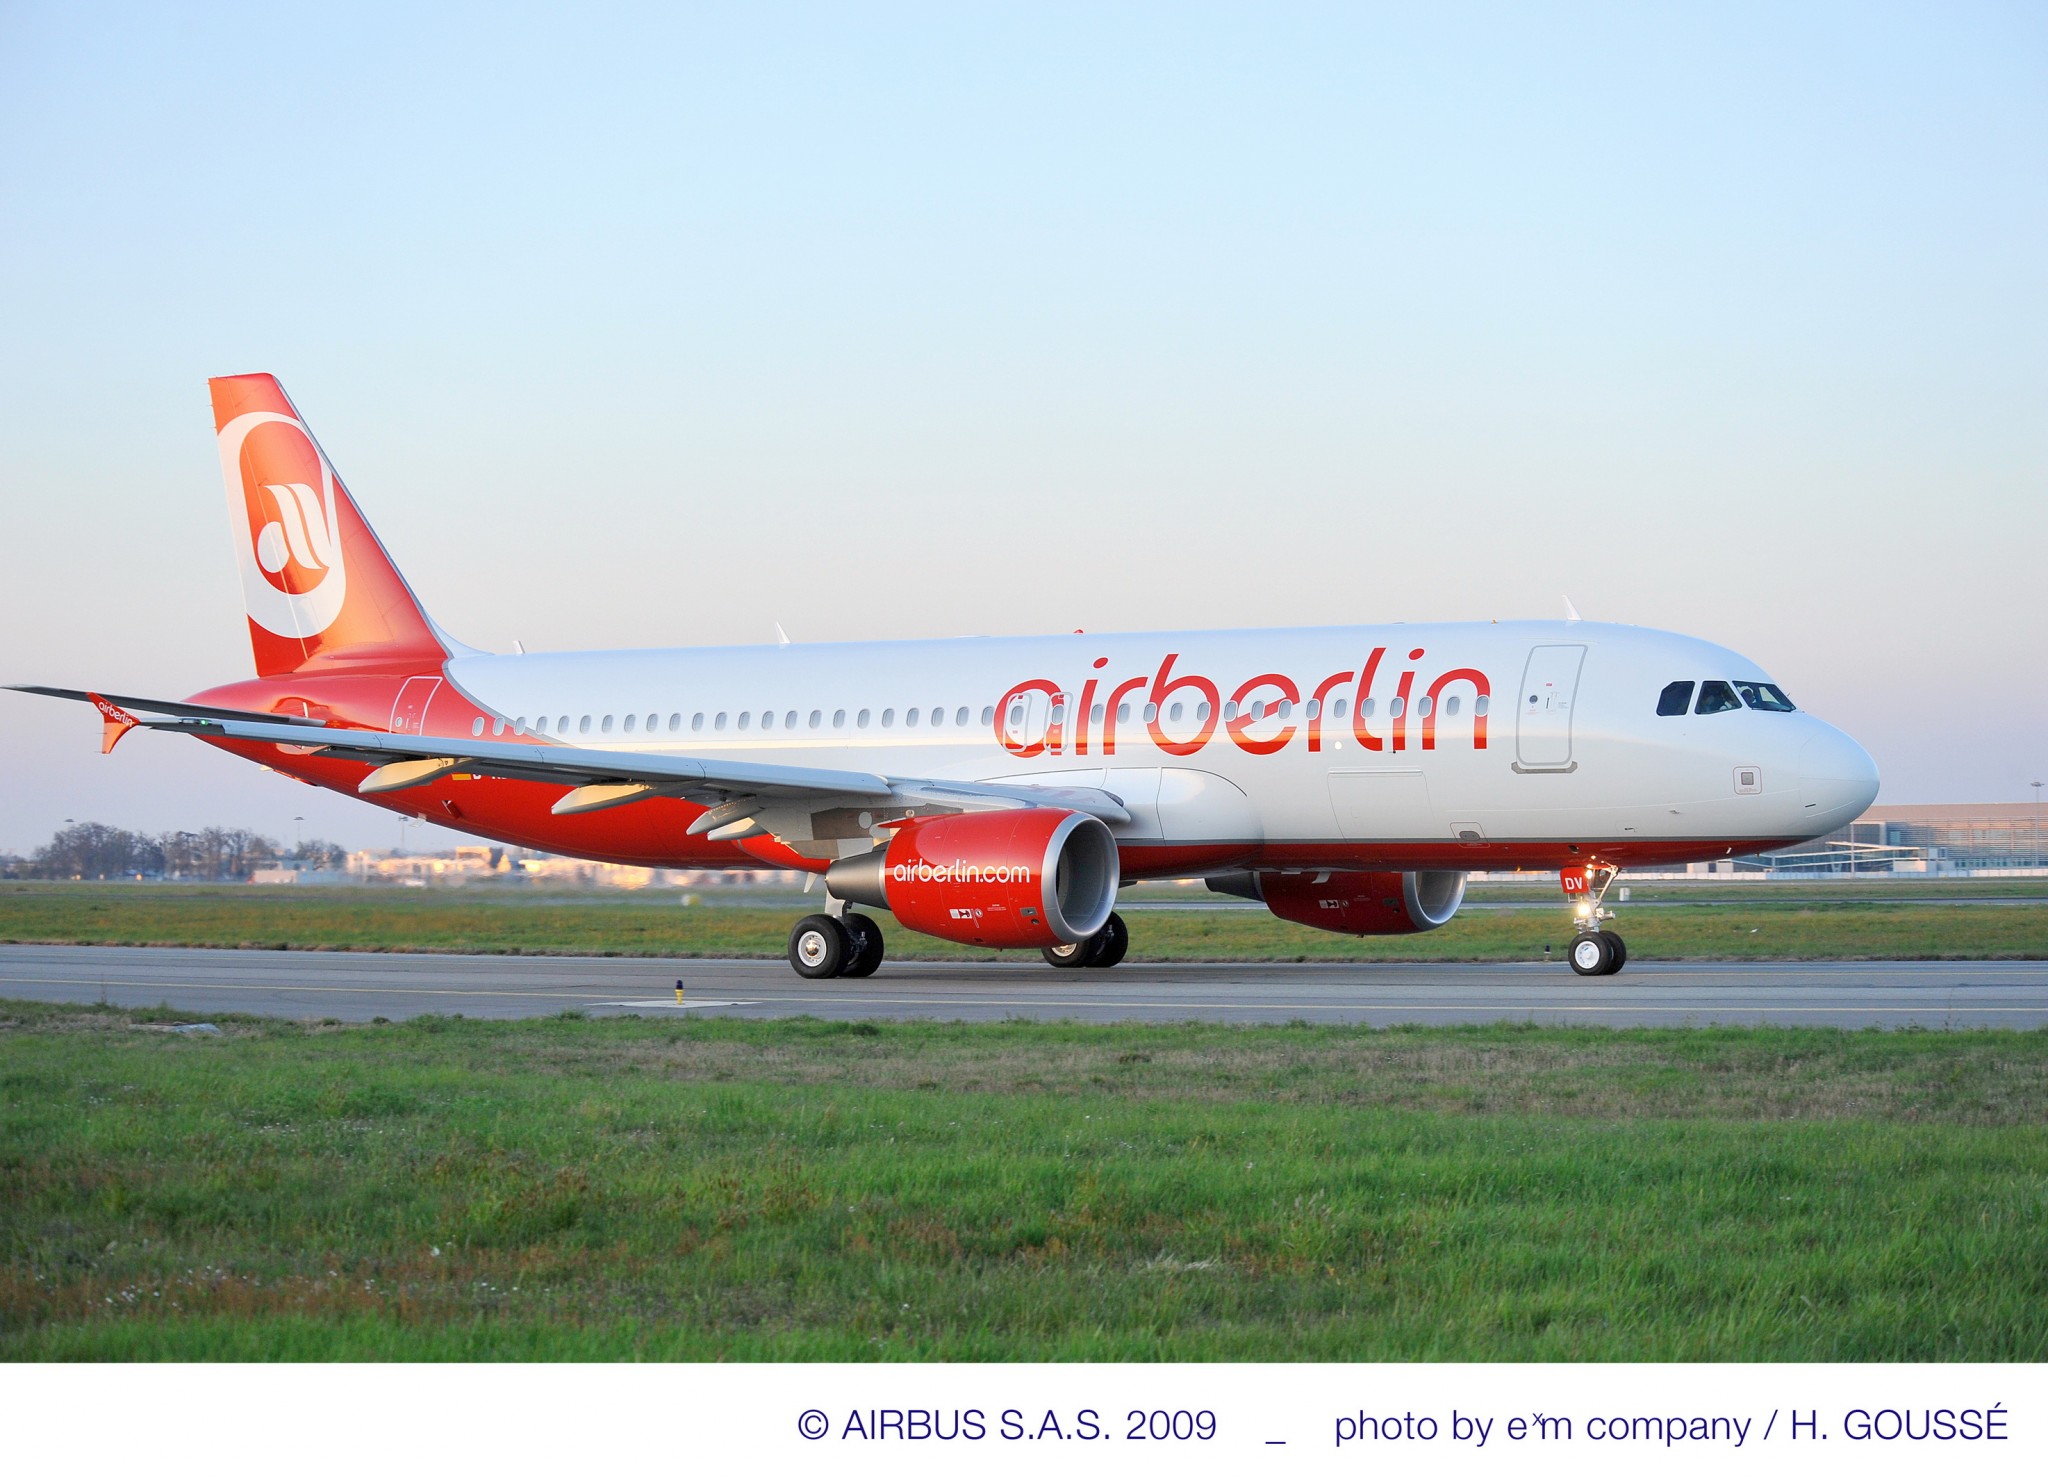 AirBerlin in administration